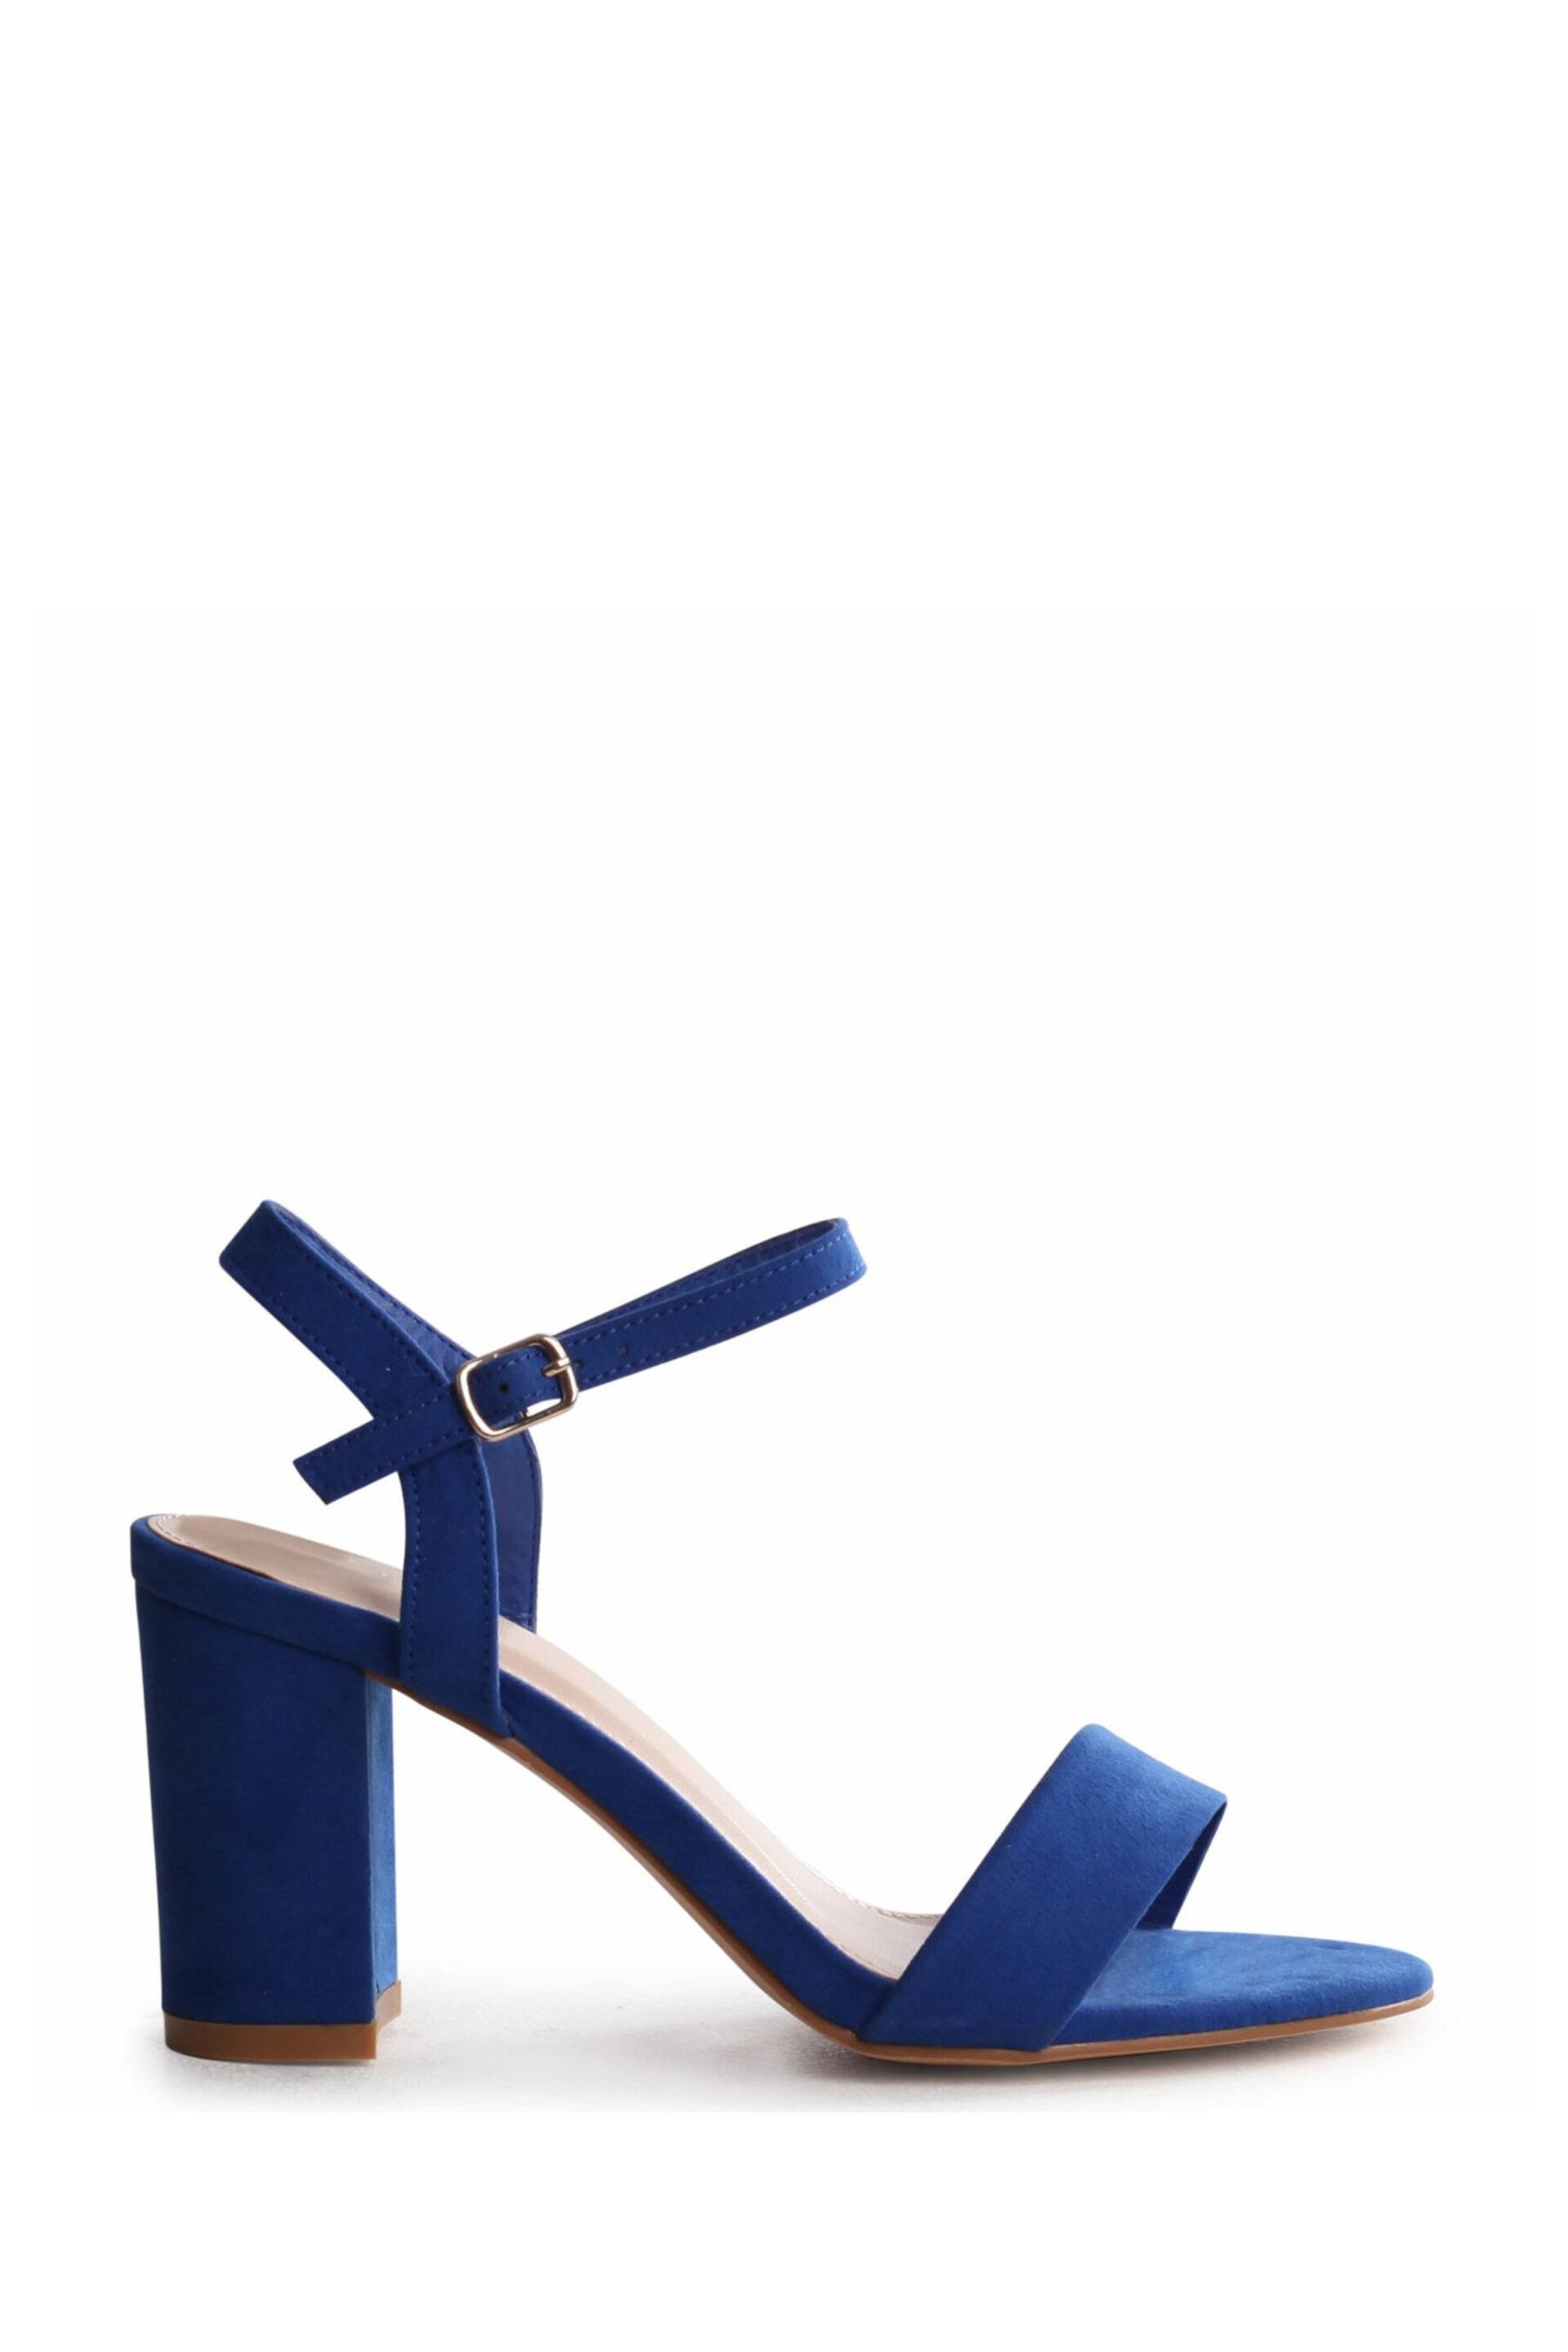 Linzi Blue Skyline Open Back Barely There Block Heeled Sandals - Image 2 of 4